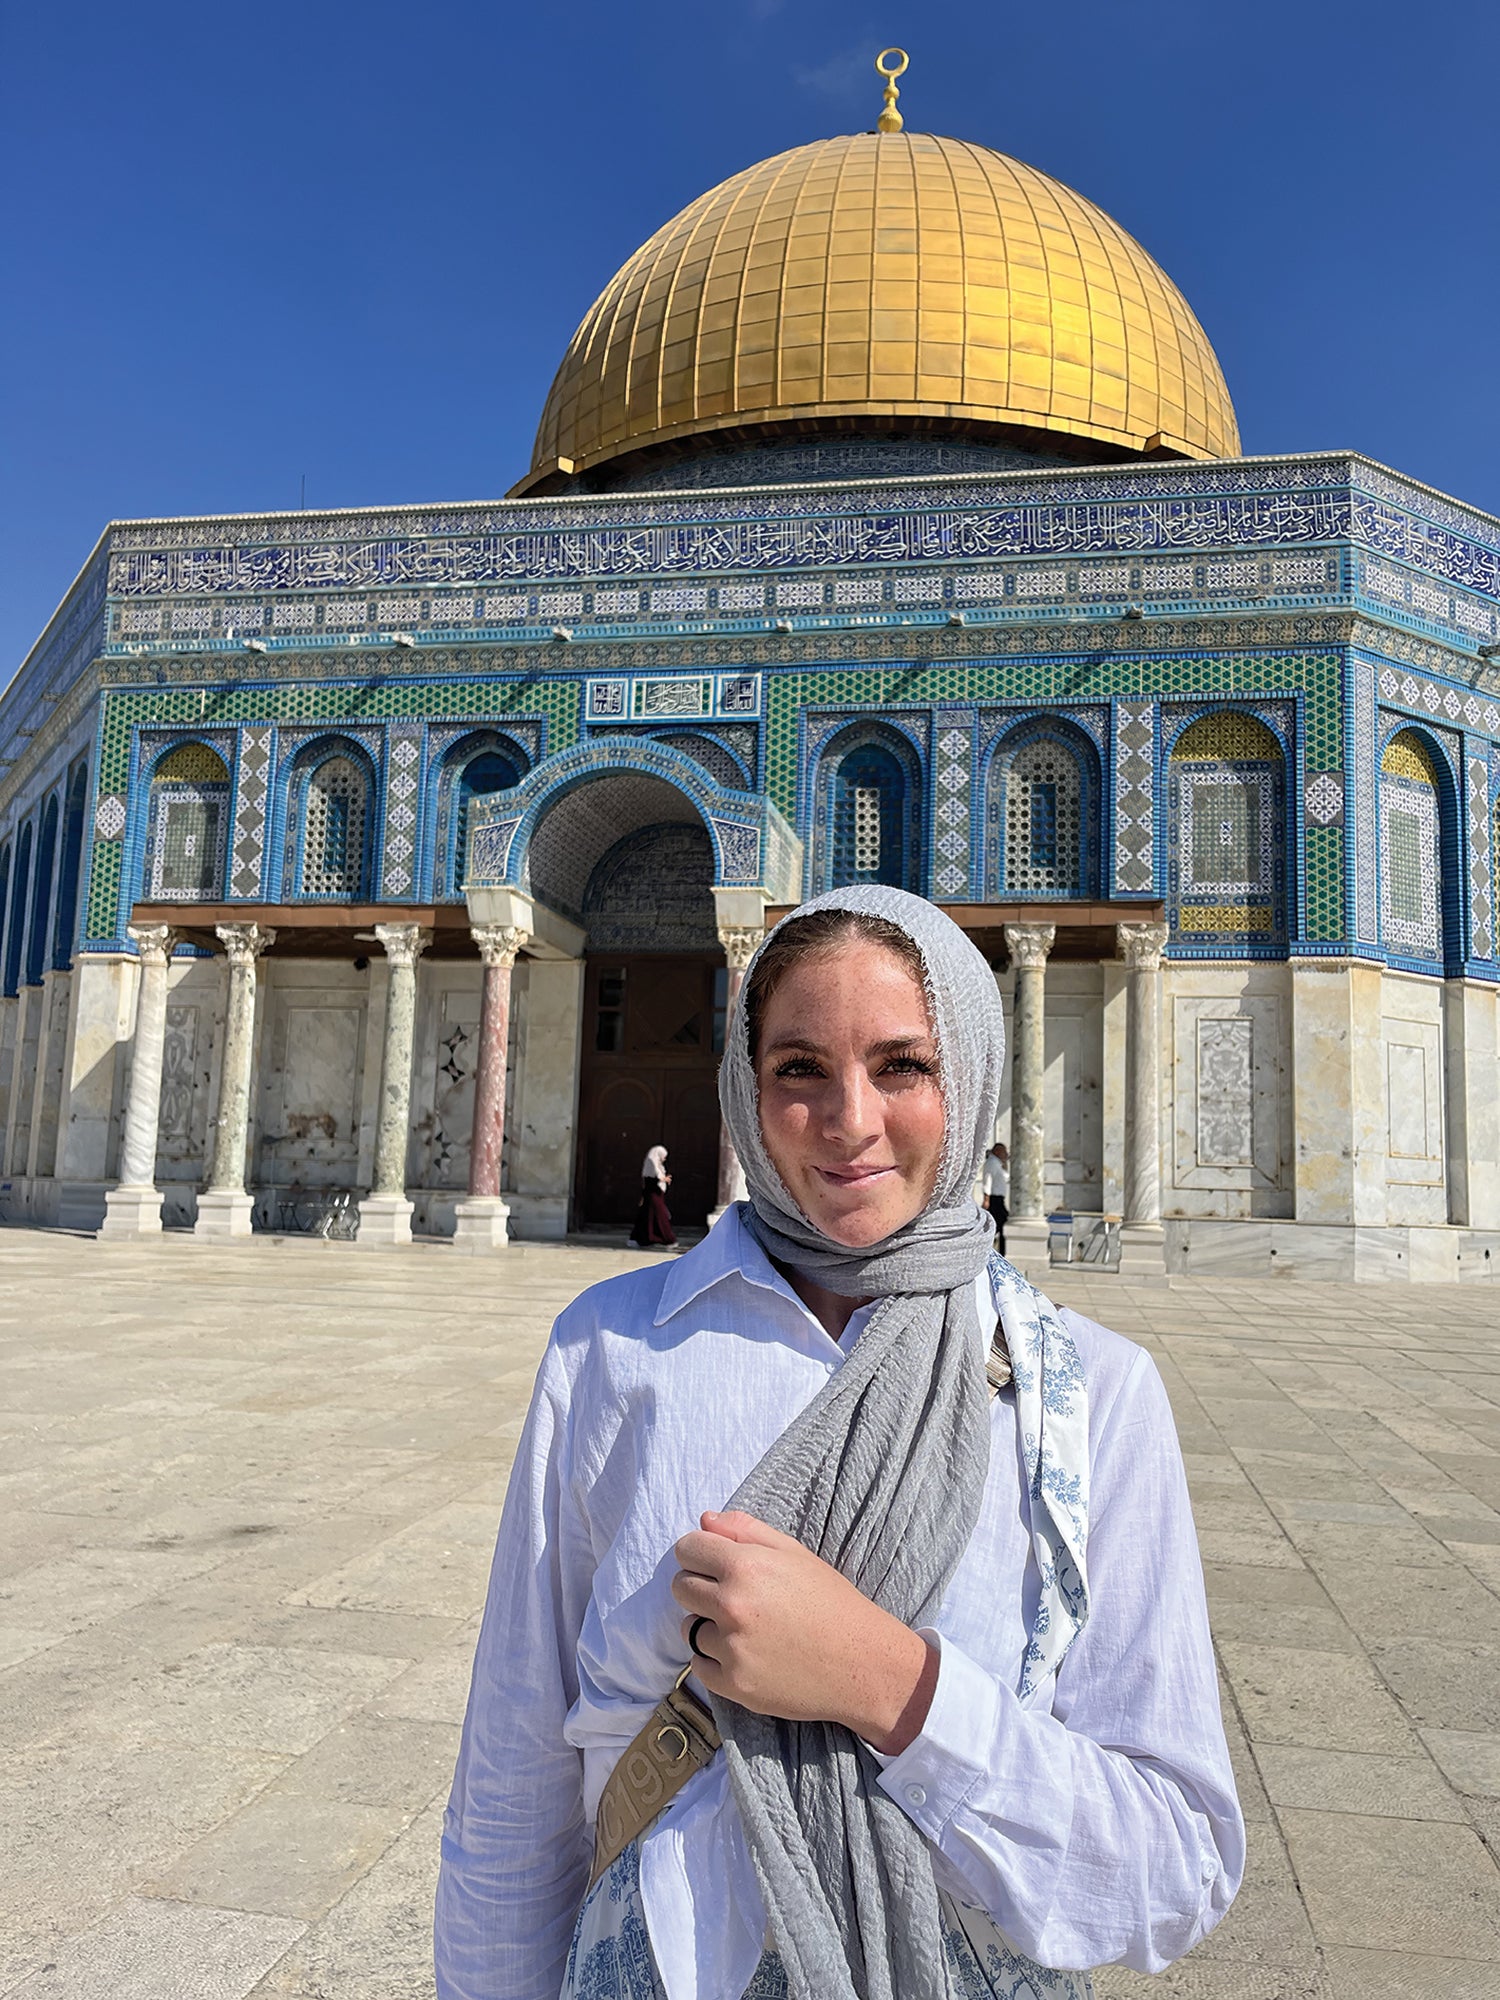 Flom at Temple Mount, also known as the Haram al-Sharif, in the Old City of Jerusalem. (Credit: Courtesy photo)